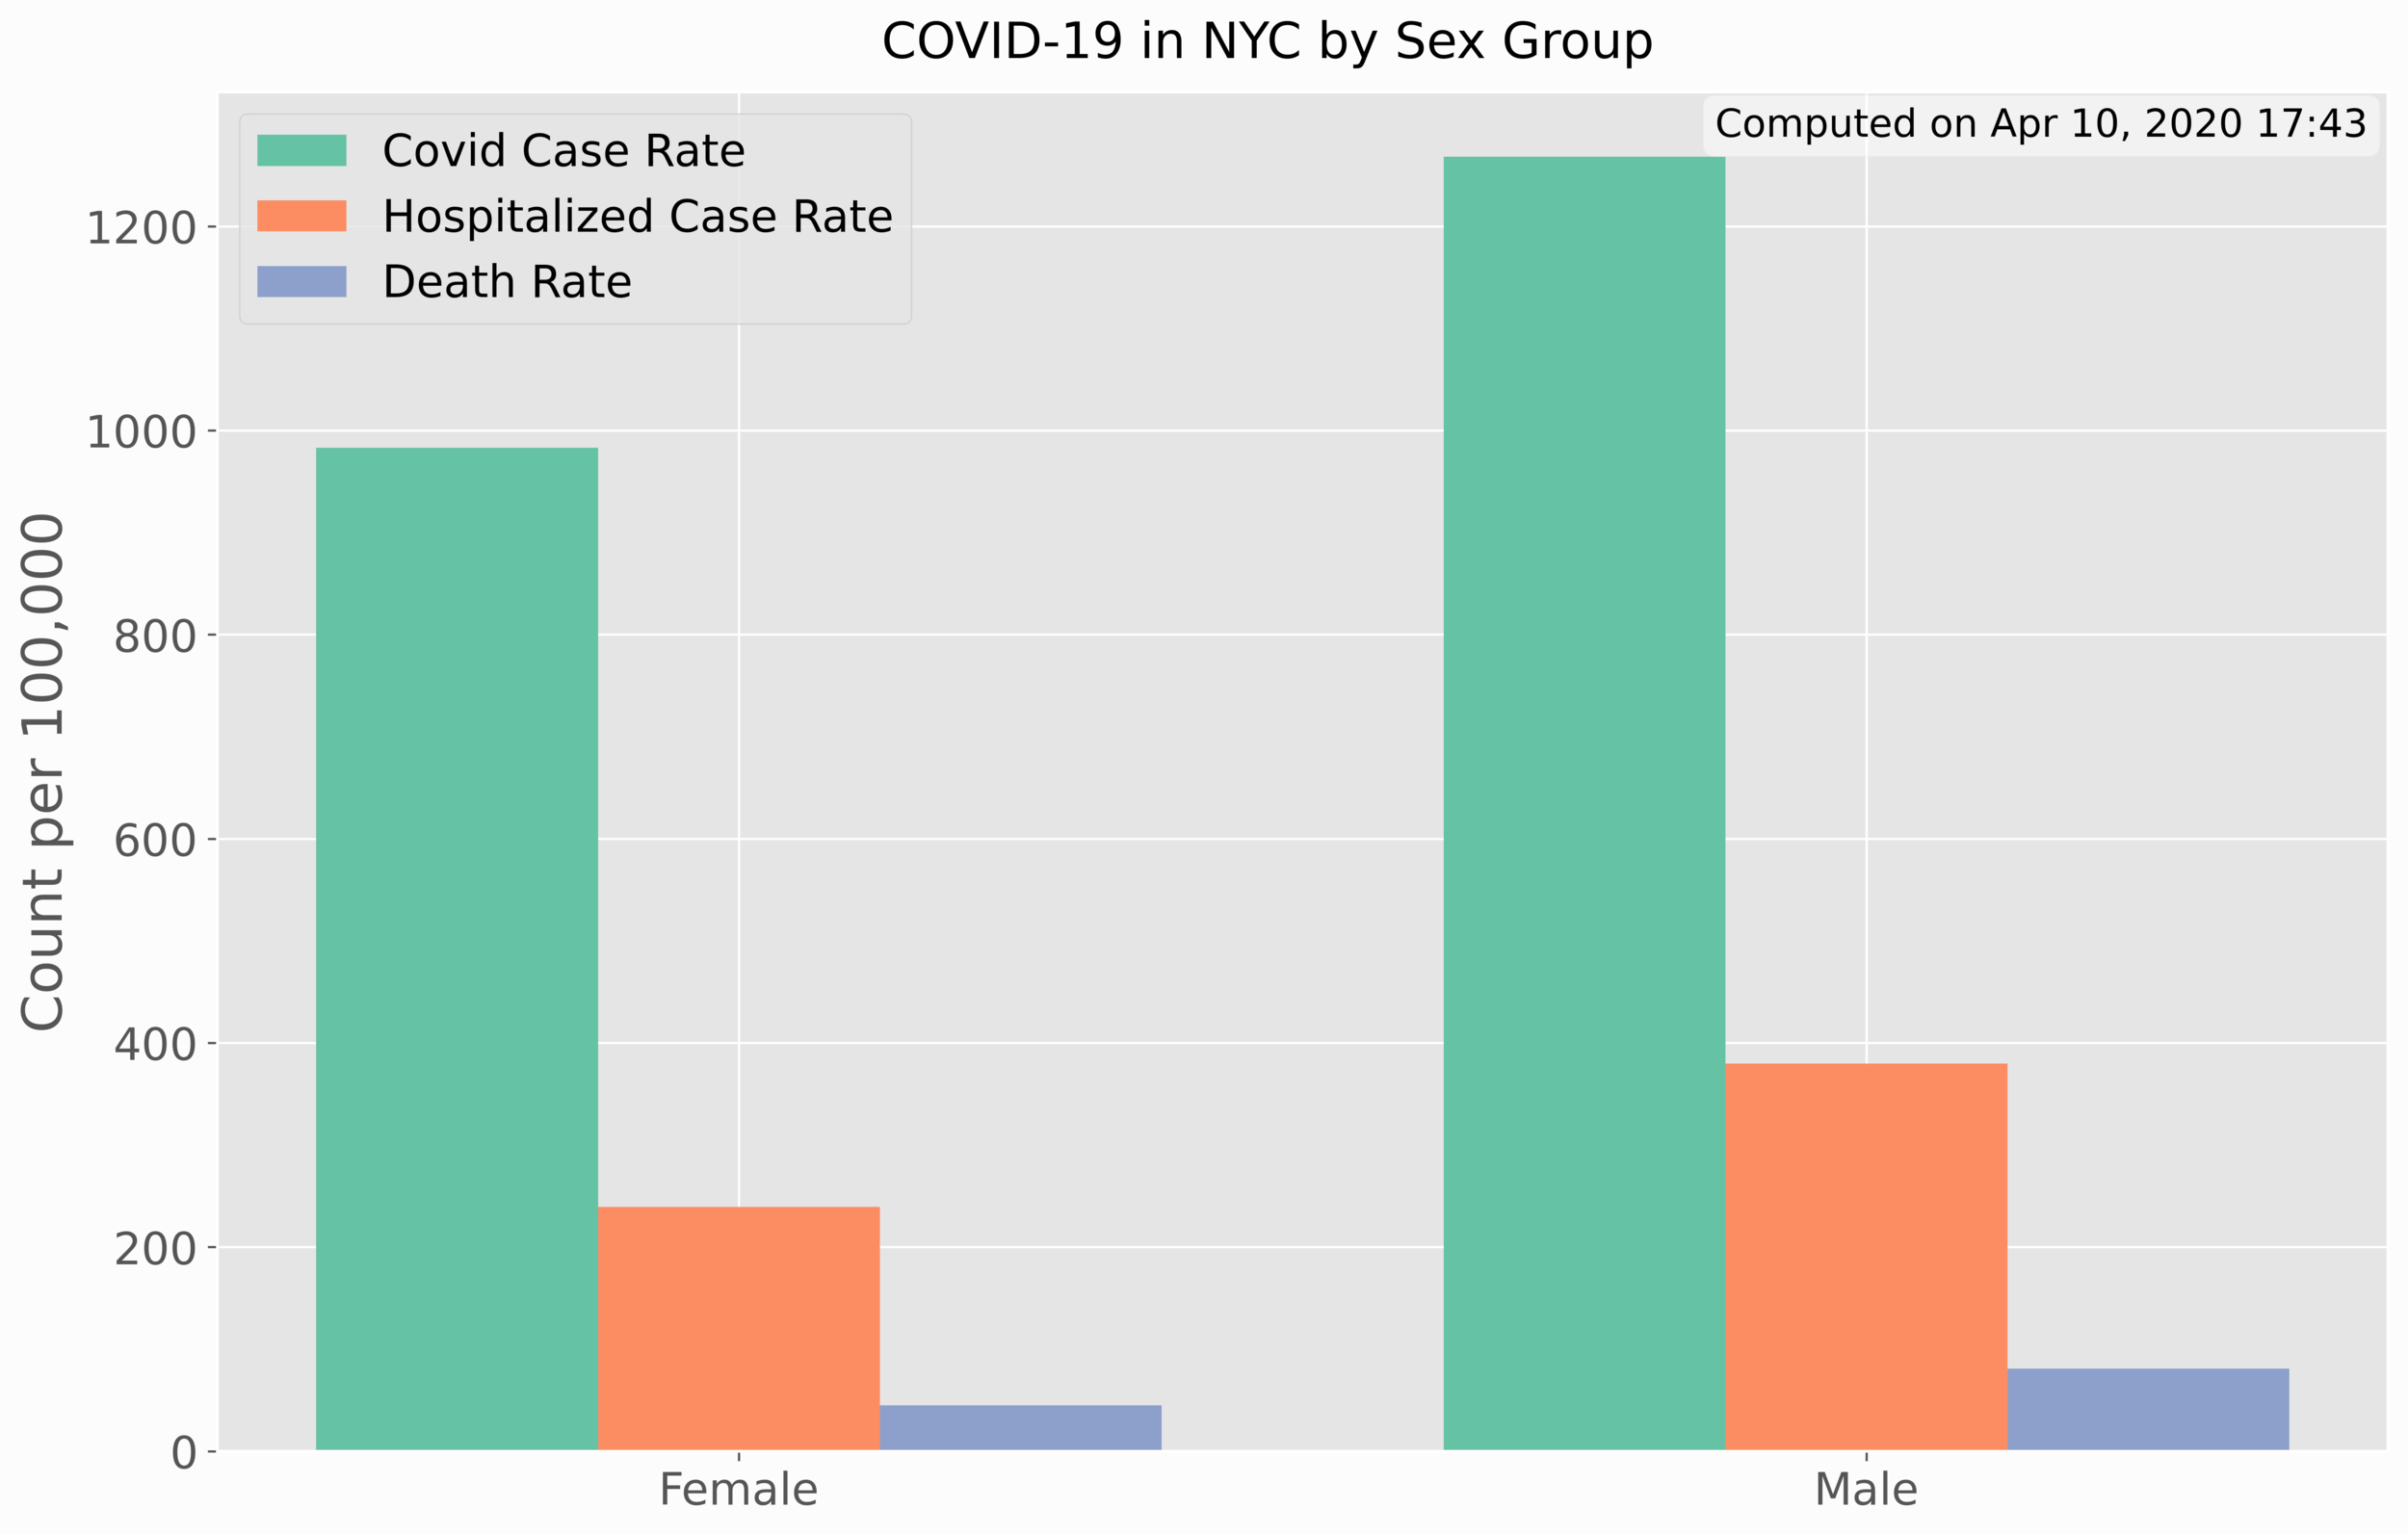 Distribution of Rates by Sex in NYC